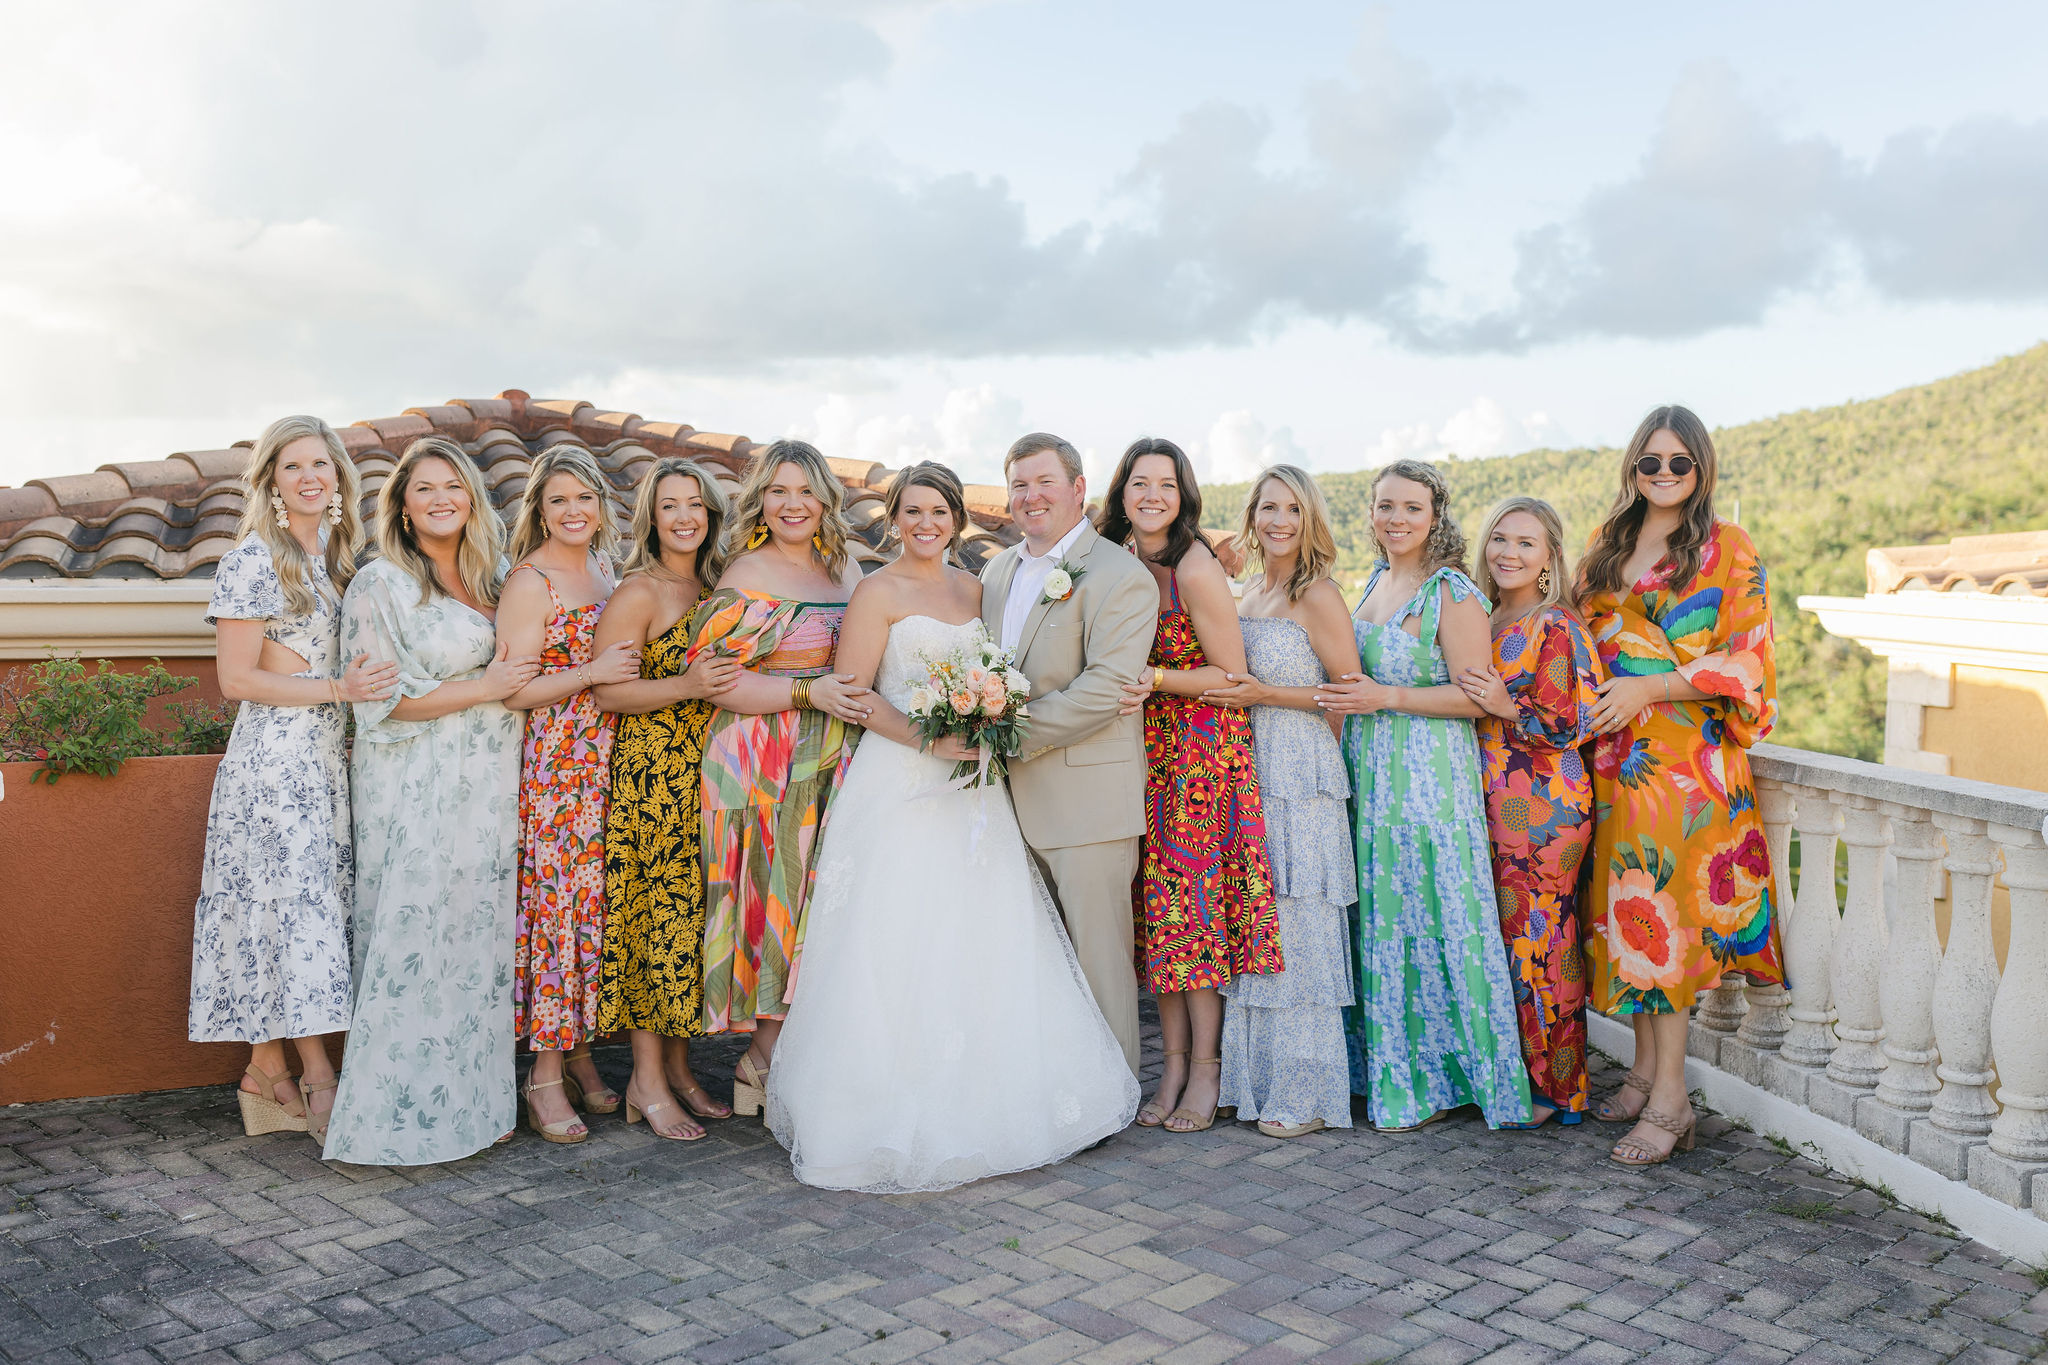 Fourteen months after Charles Vernon asked Sara Brown to marry him, the couple said their vows on a sun-splashed terrace at The Hills, St. John, overlooking the cobalt-blue Caribbean Sea. Although the setting was far from home, they were surrounded by 75 friends and family members.